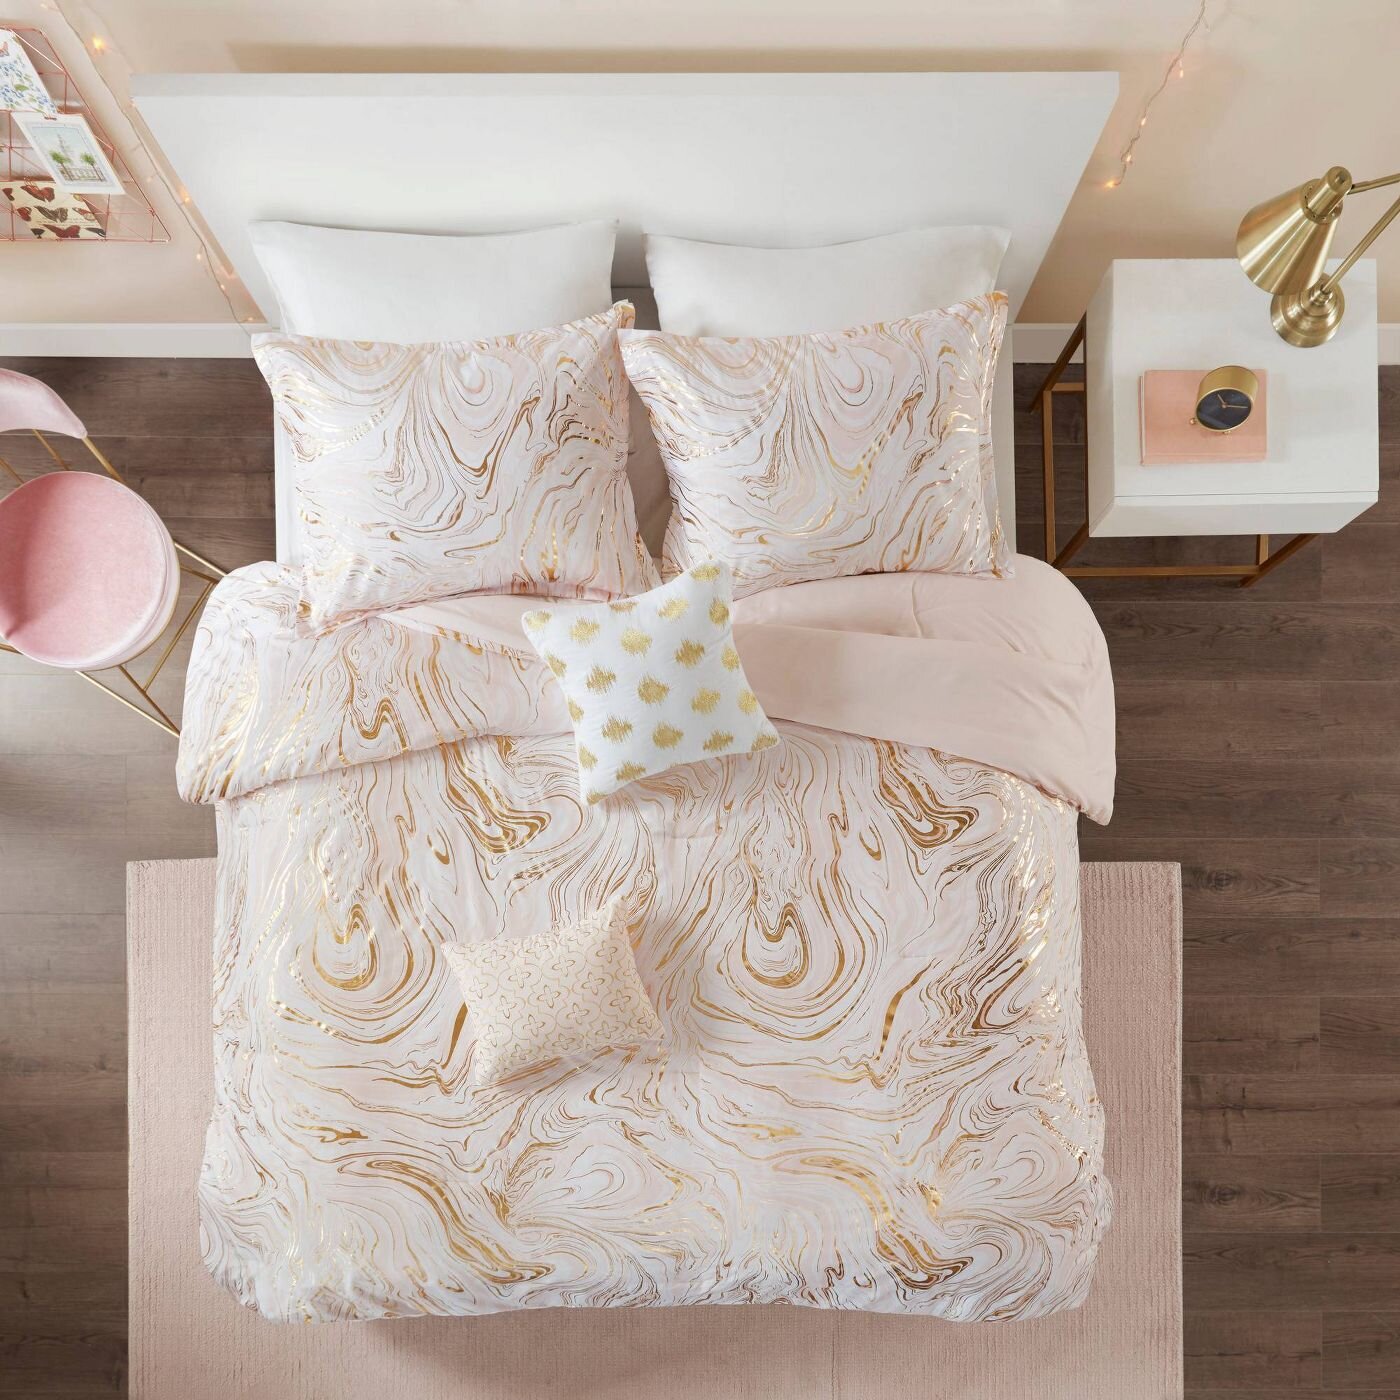 Gold, Copper, Silver, Pearl Glamorous Bedding